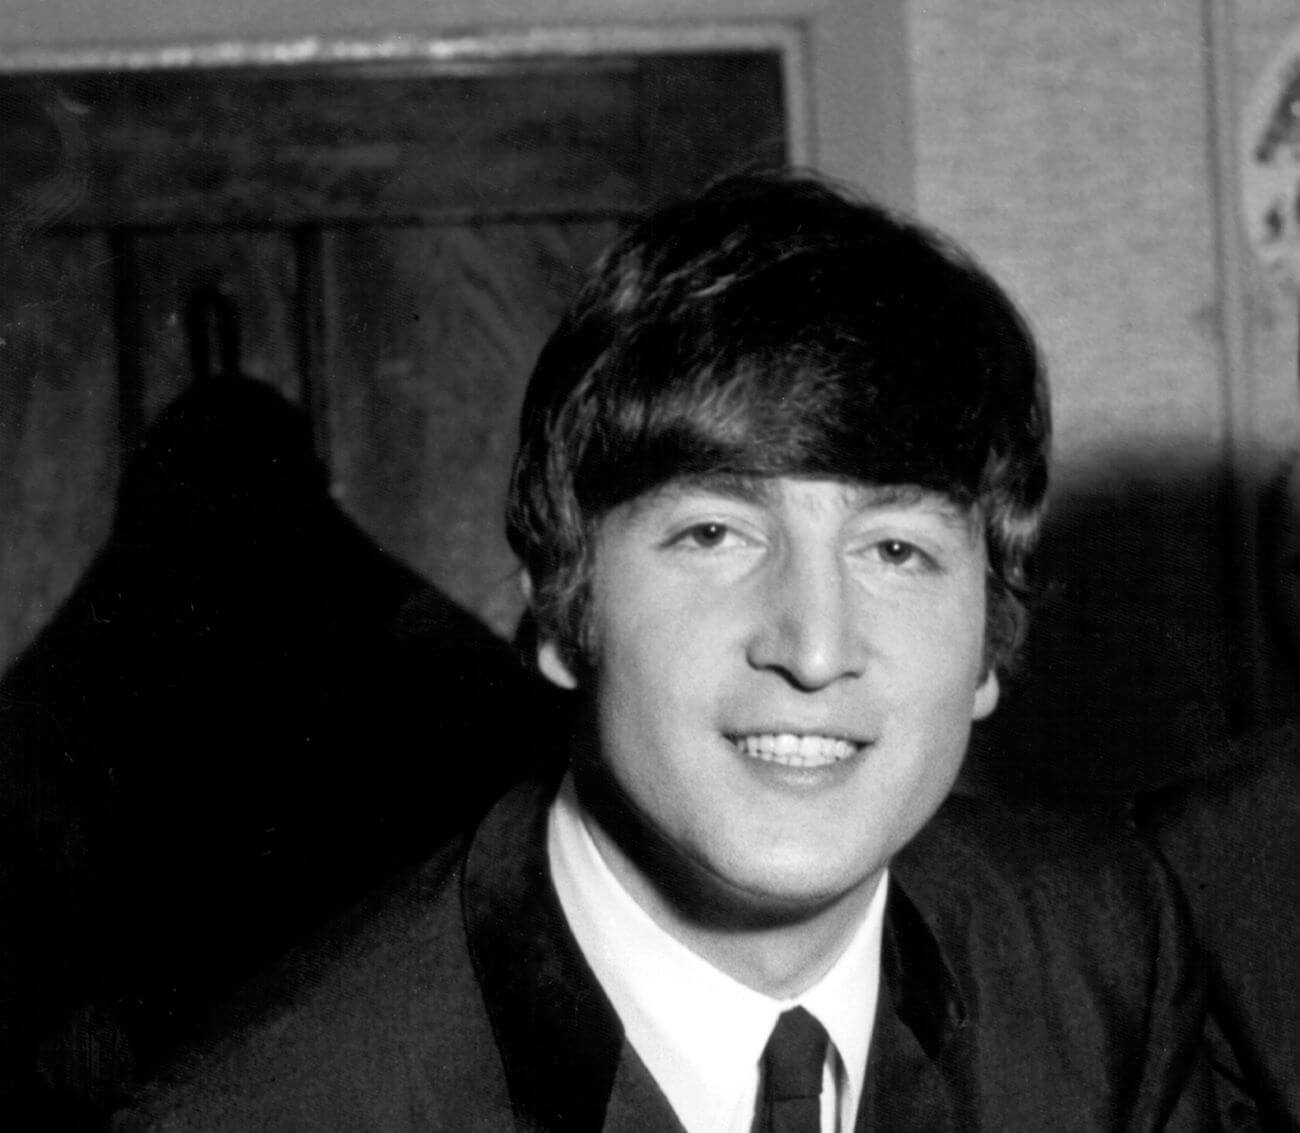 A black and white picture of John Lennon wearing a suit and tie. He stands in a doorway.